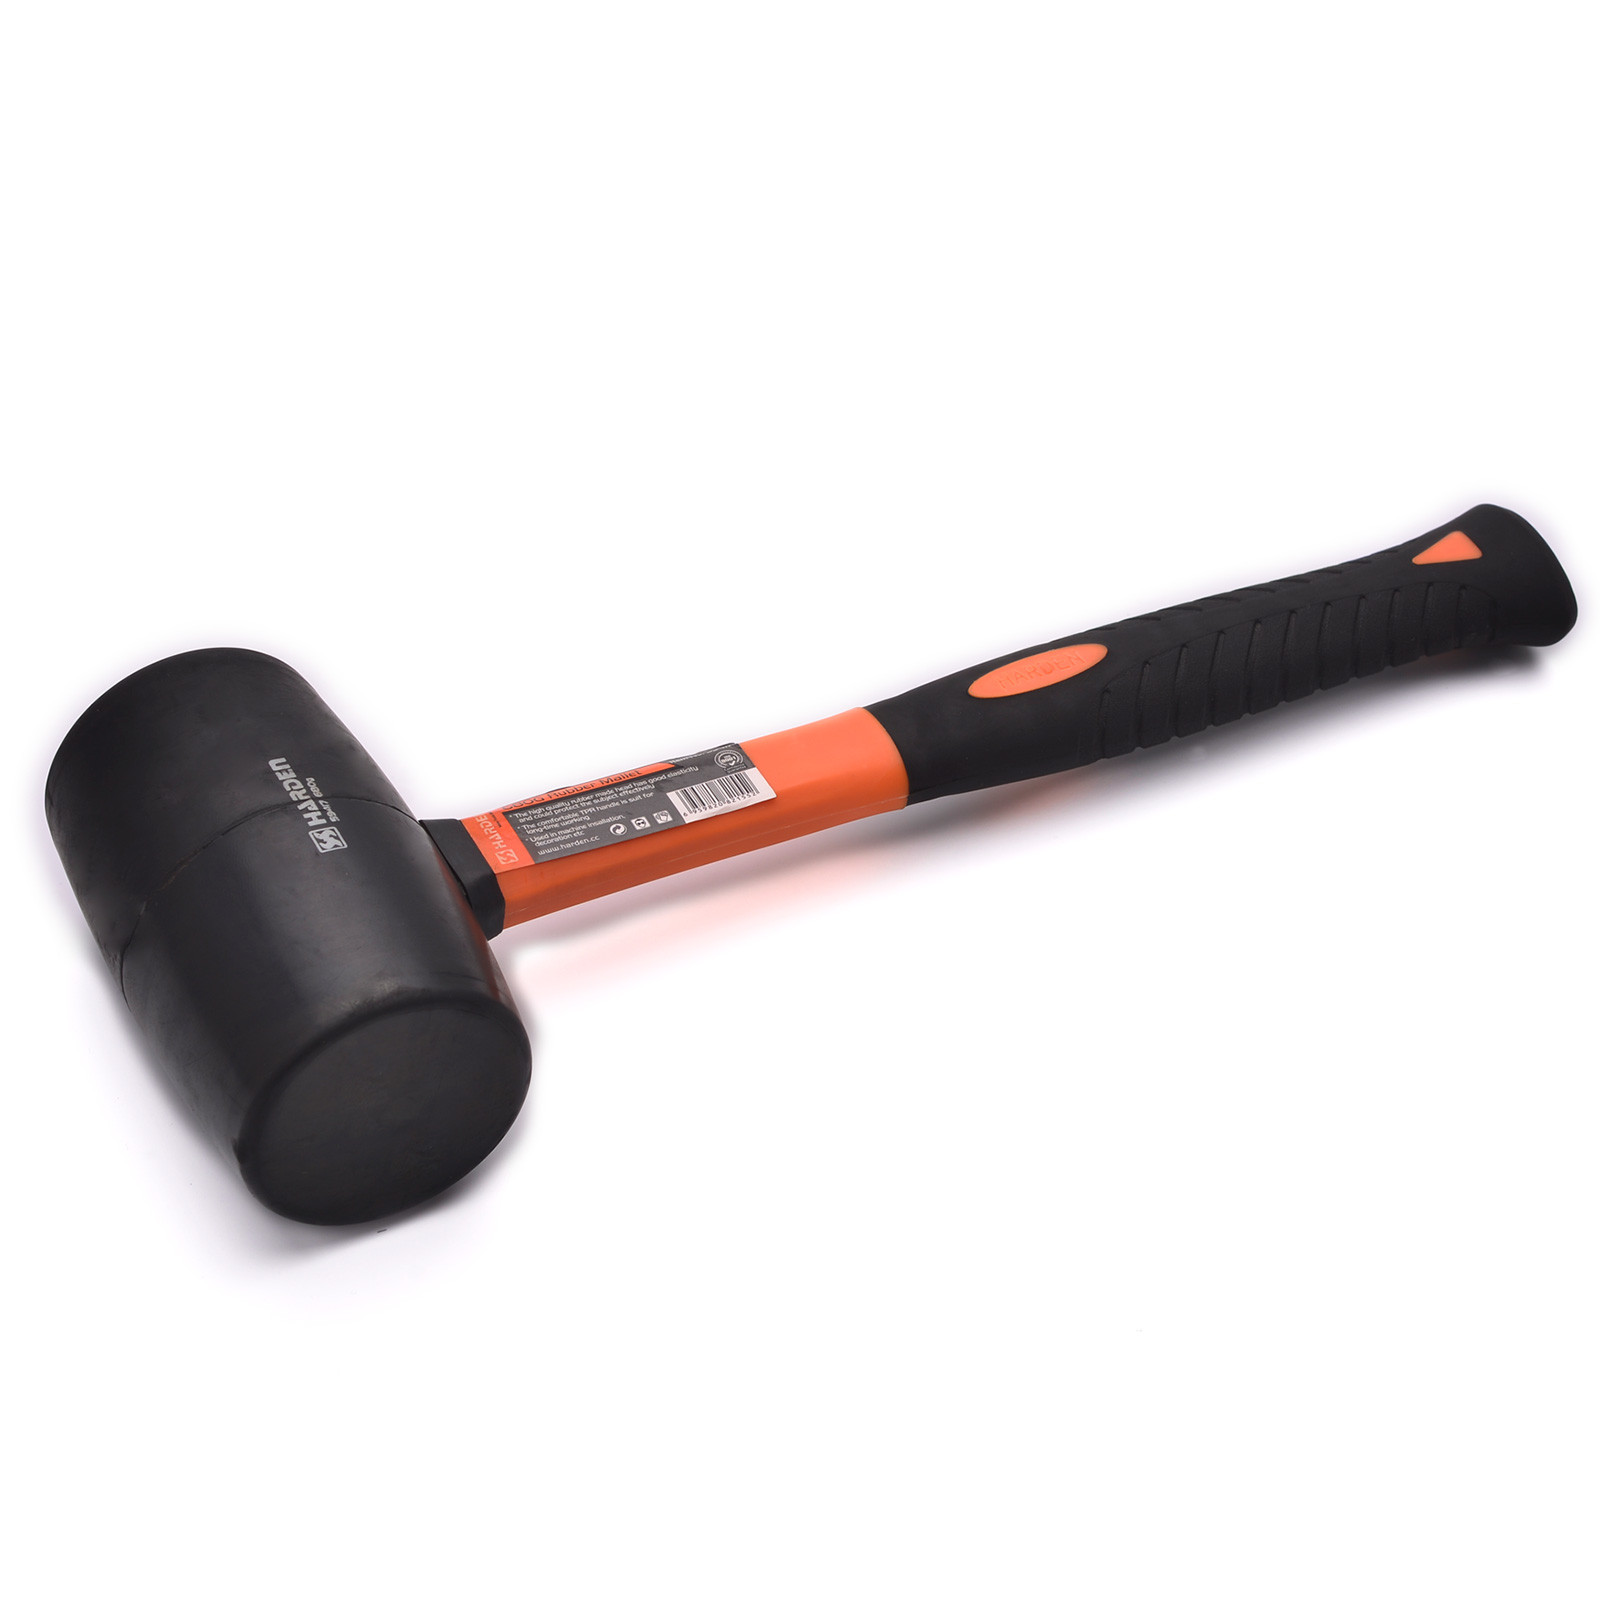 590417-Harden 680g Rubber Mallet With Fibreglass Handle